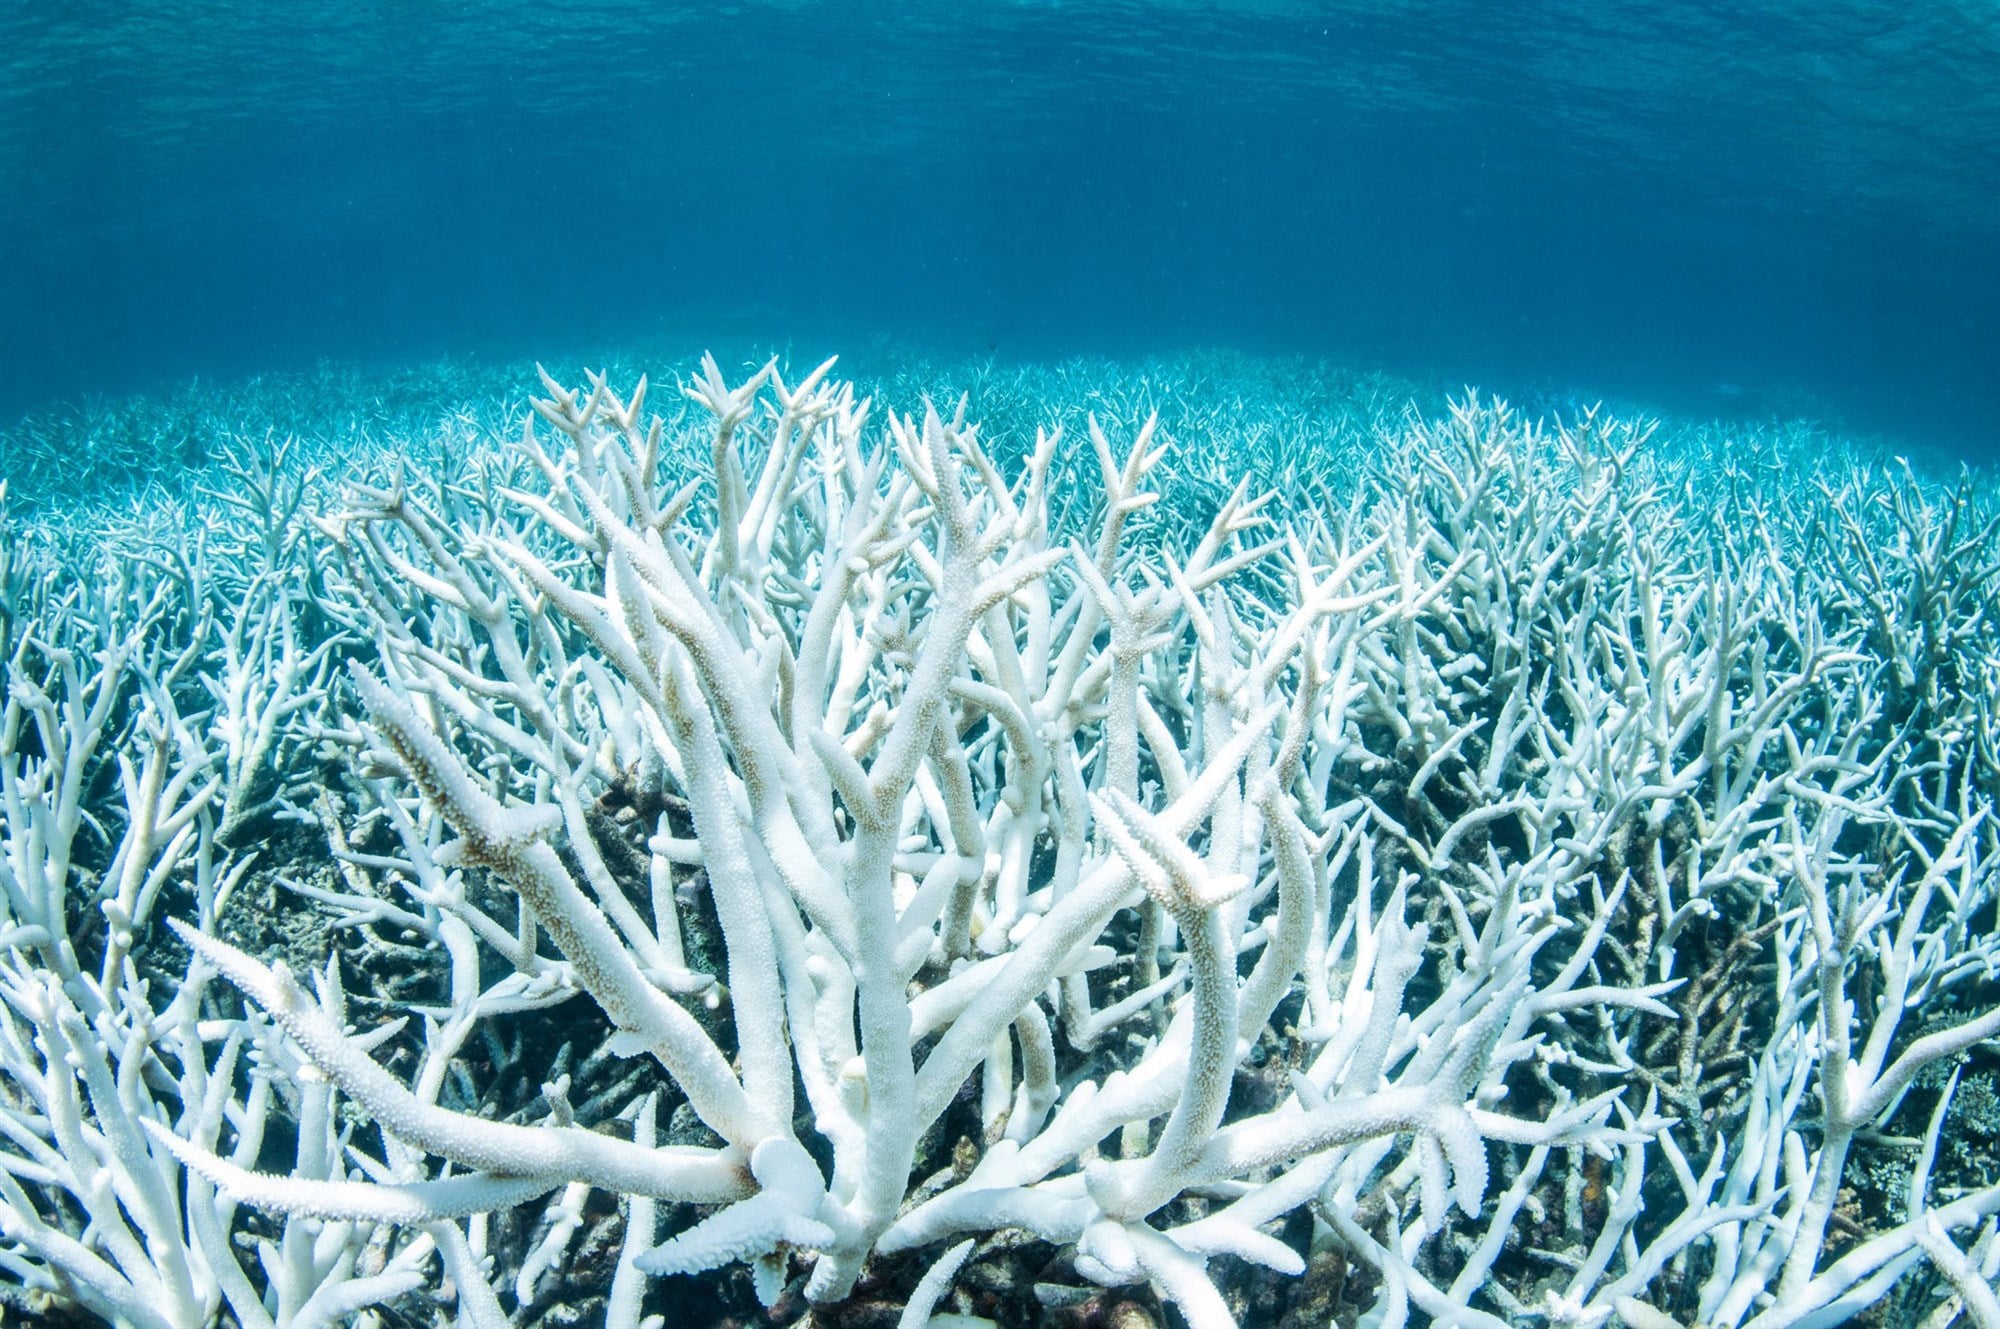 image of bleached coral at The Great Barrier Reef